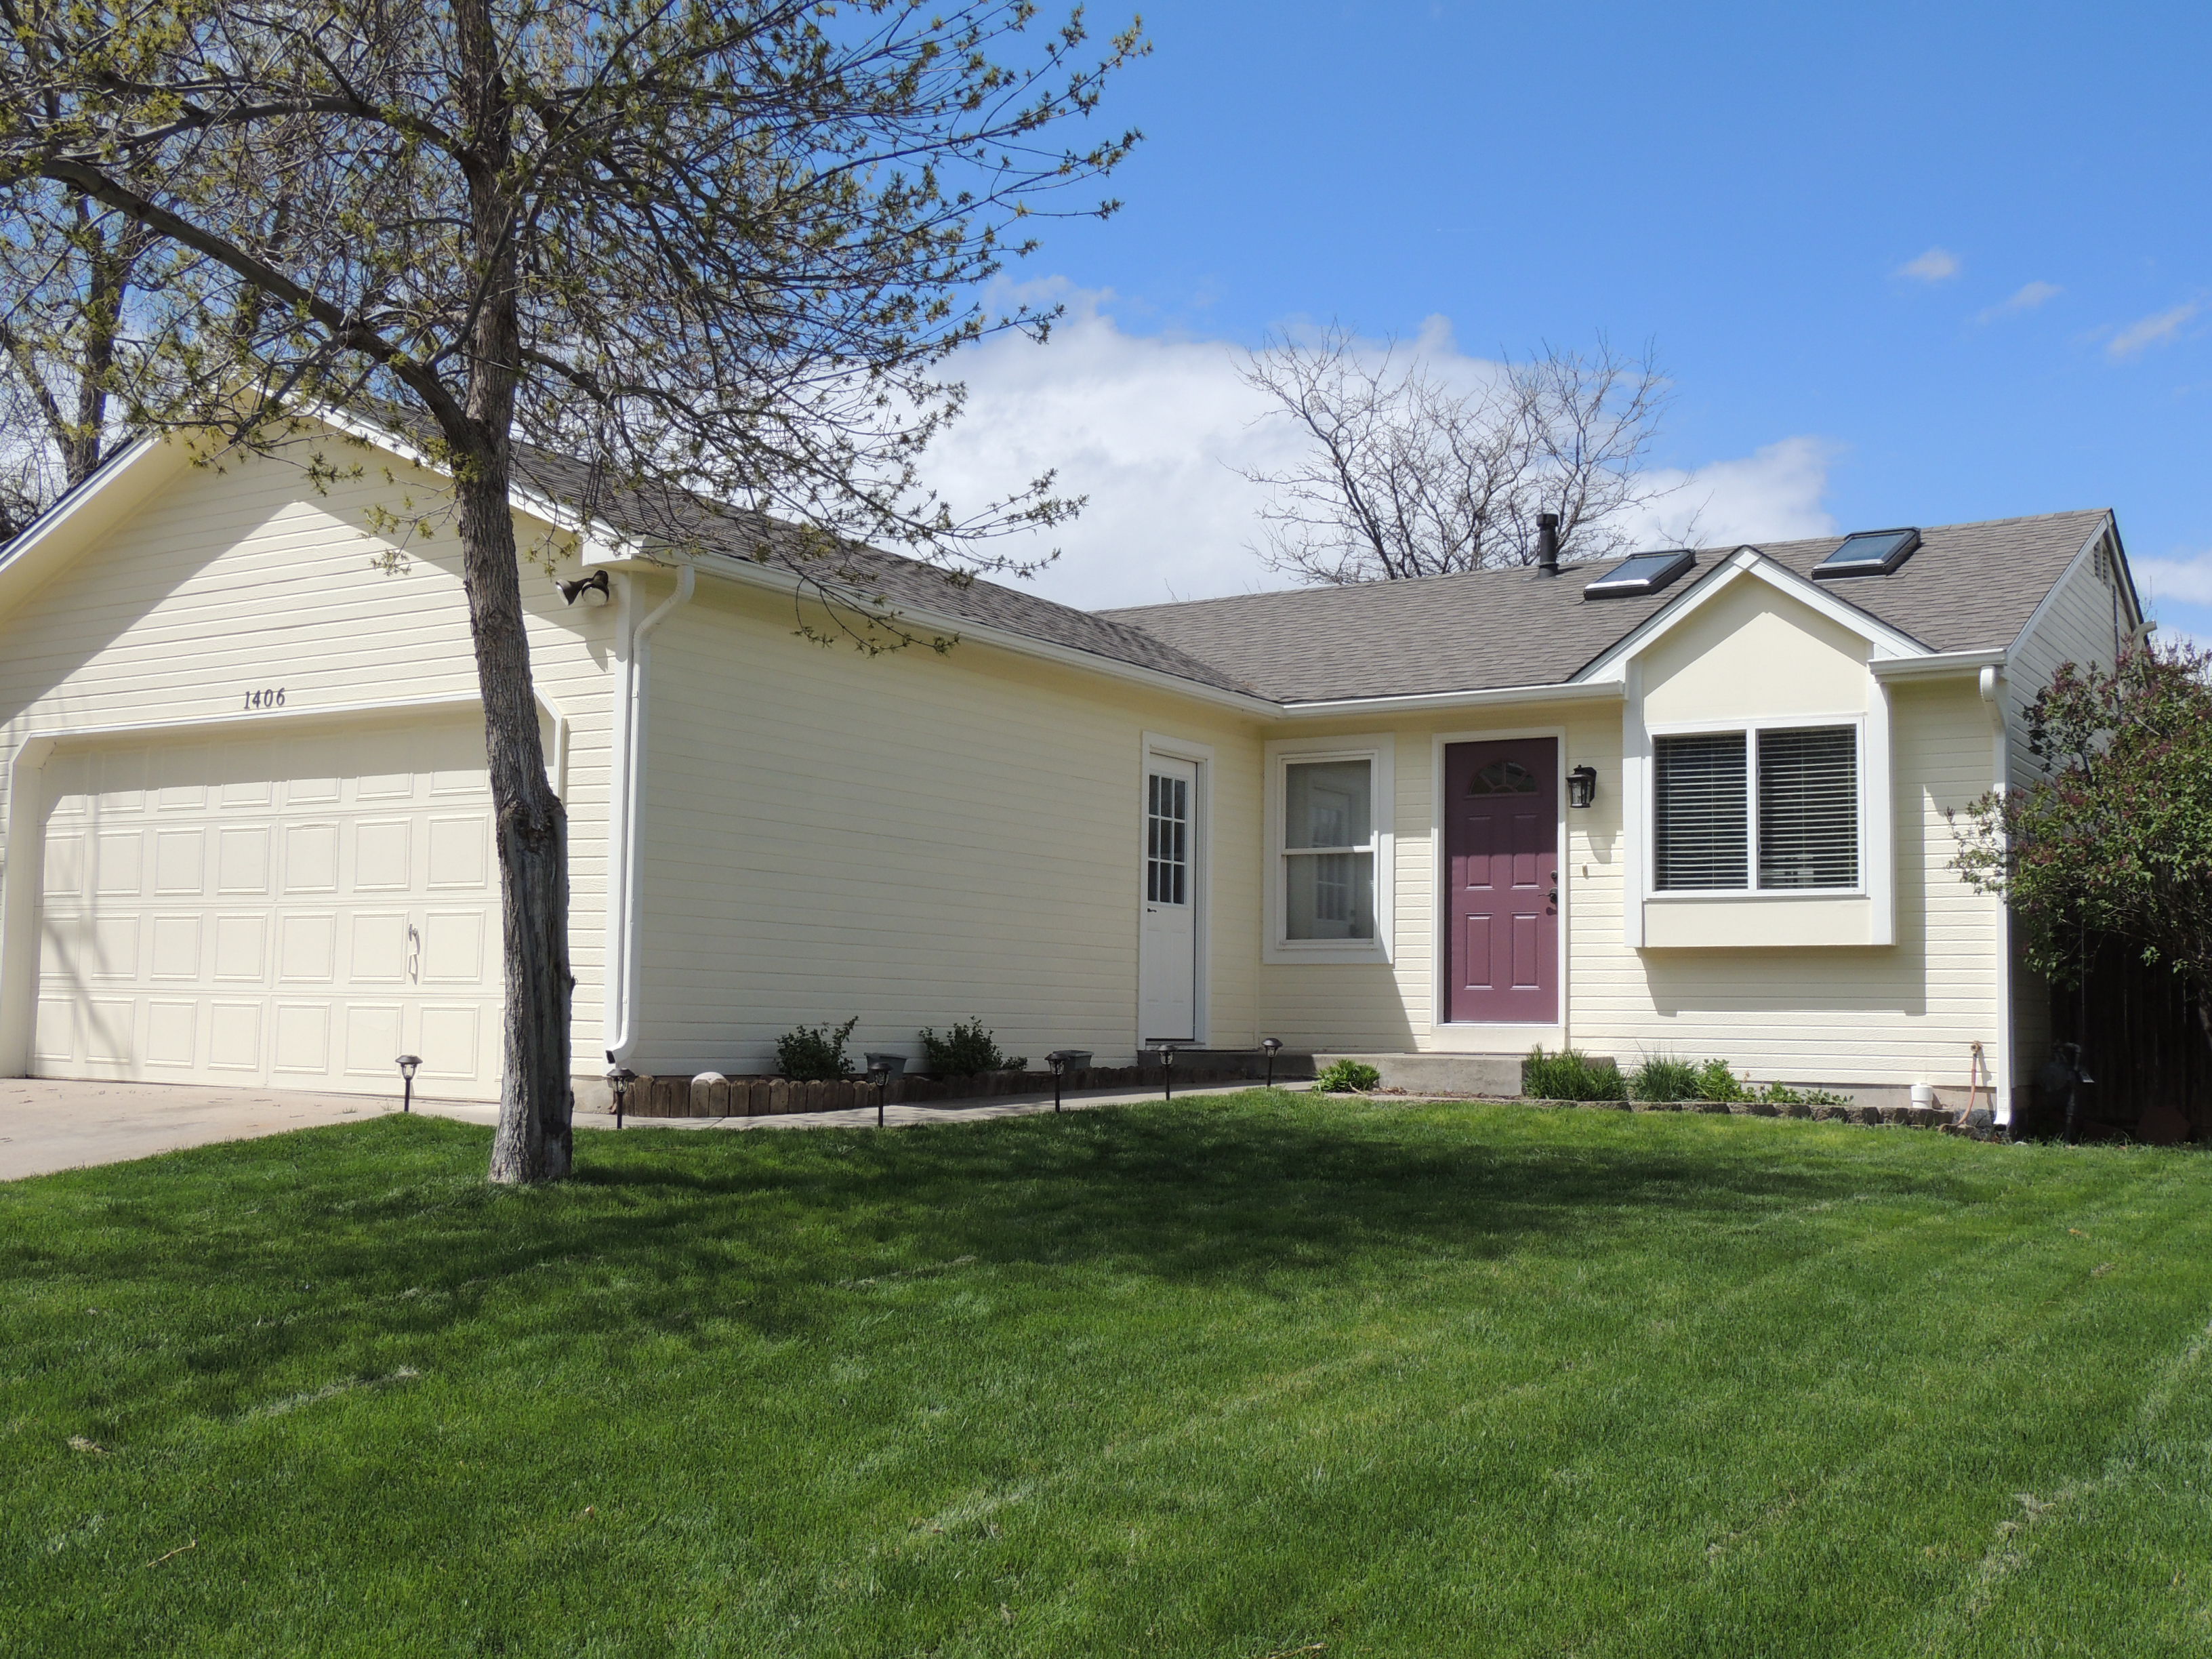 1406 Sioux Blvd. Fort Collins CO 80526